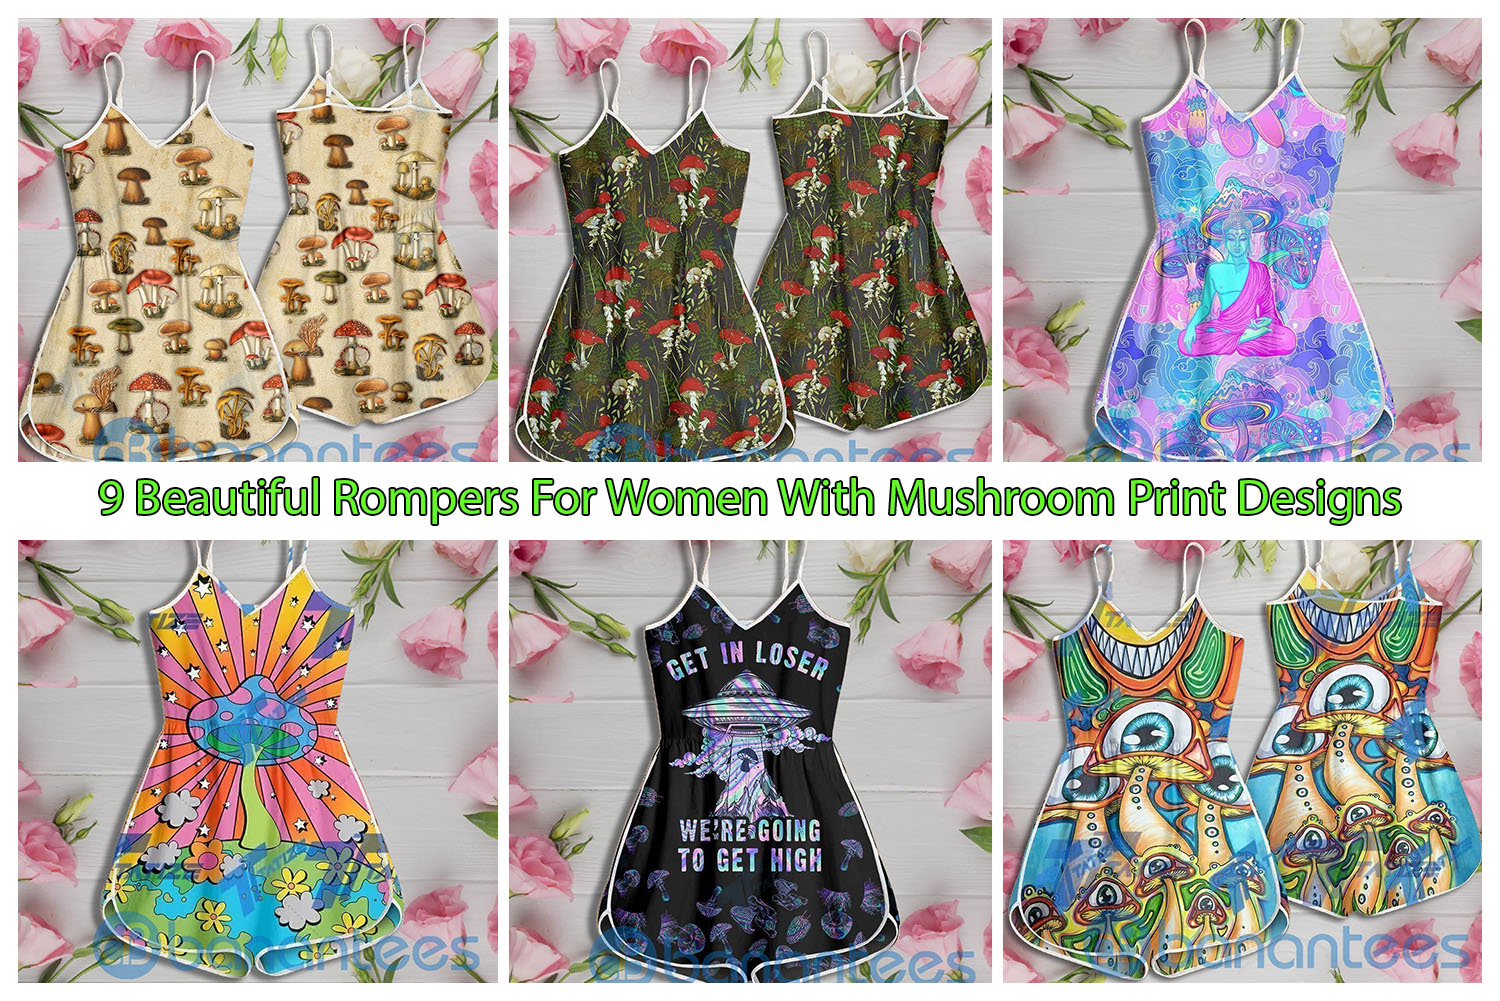 9 Beautiful Rompers For Women With Mushroom Print Designs